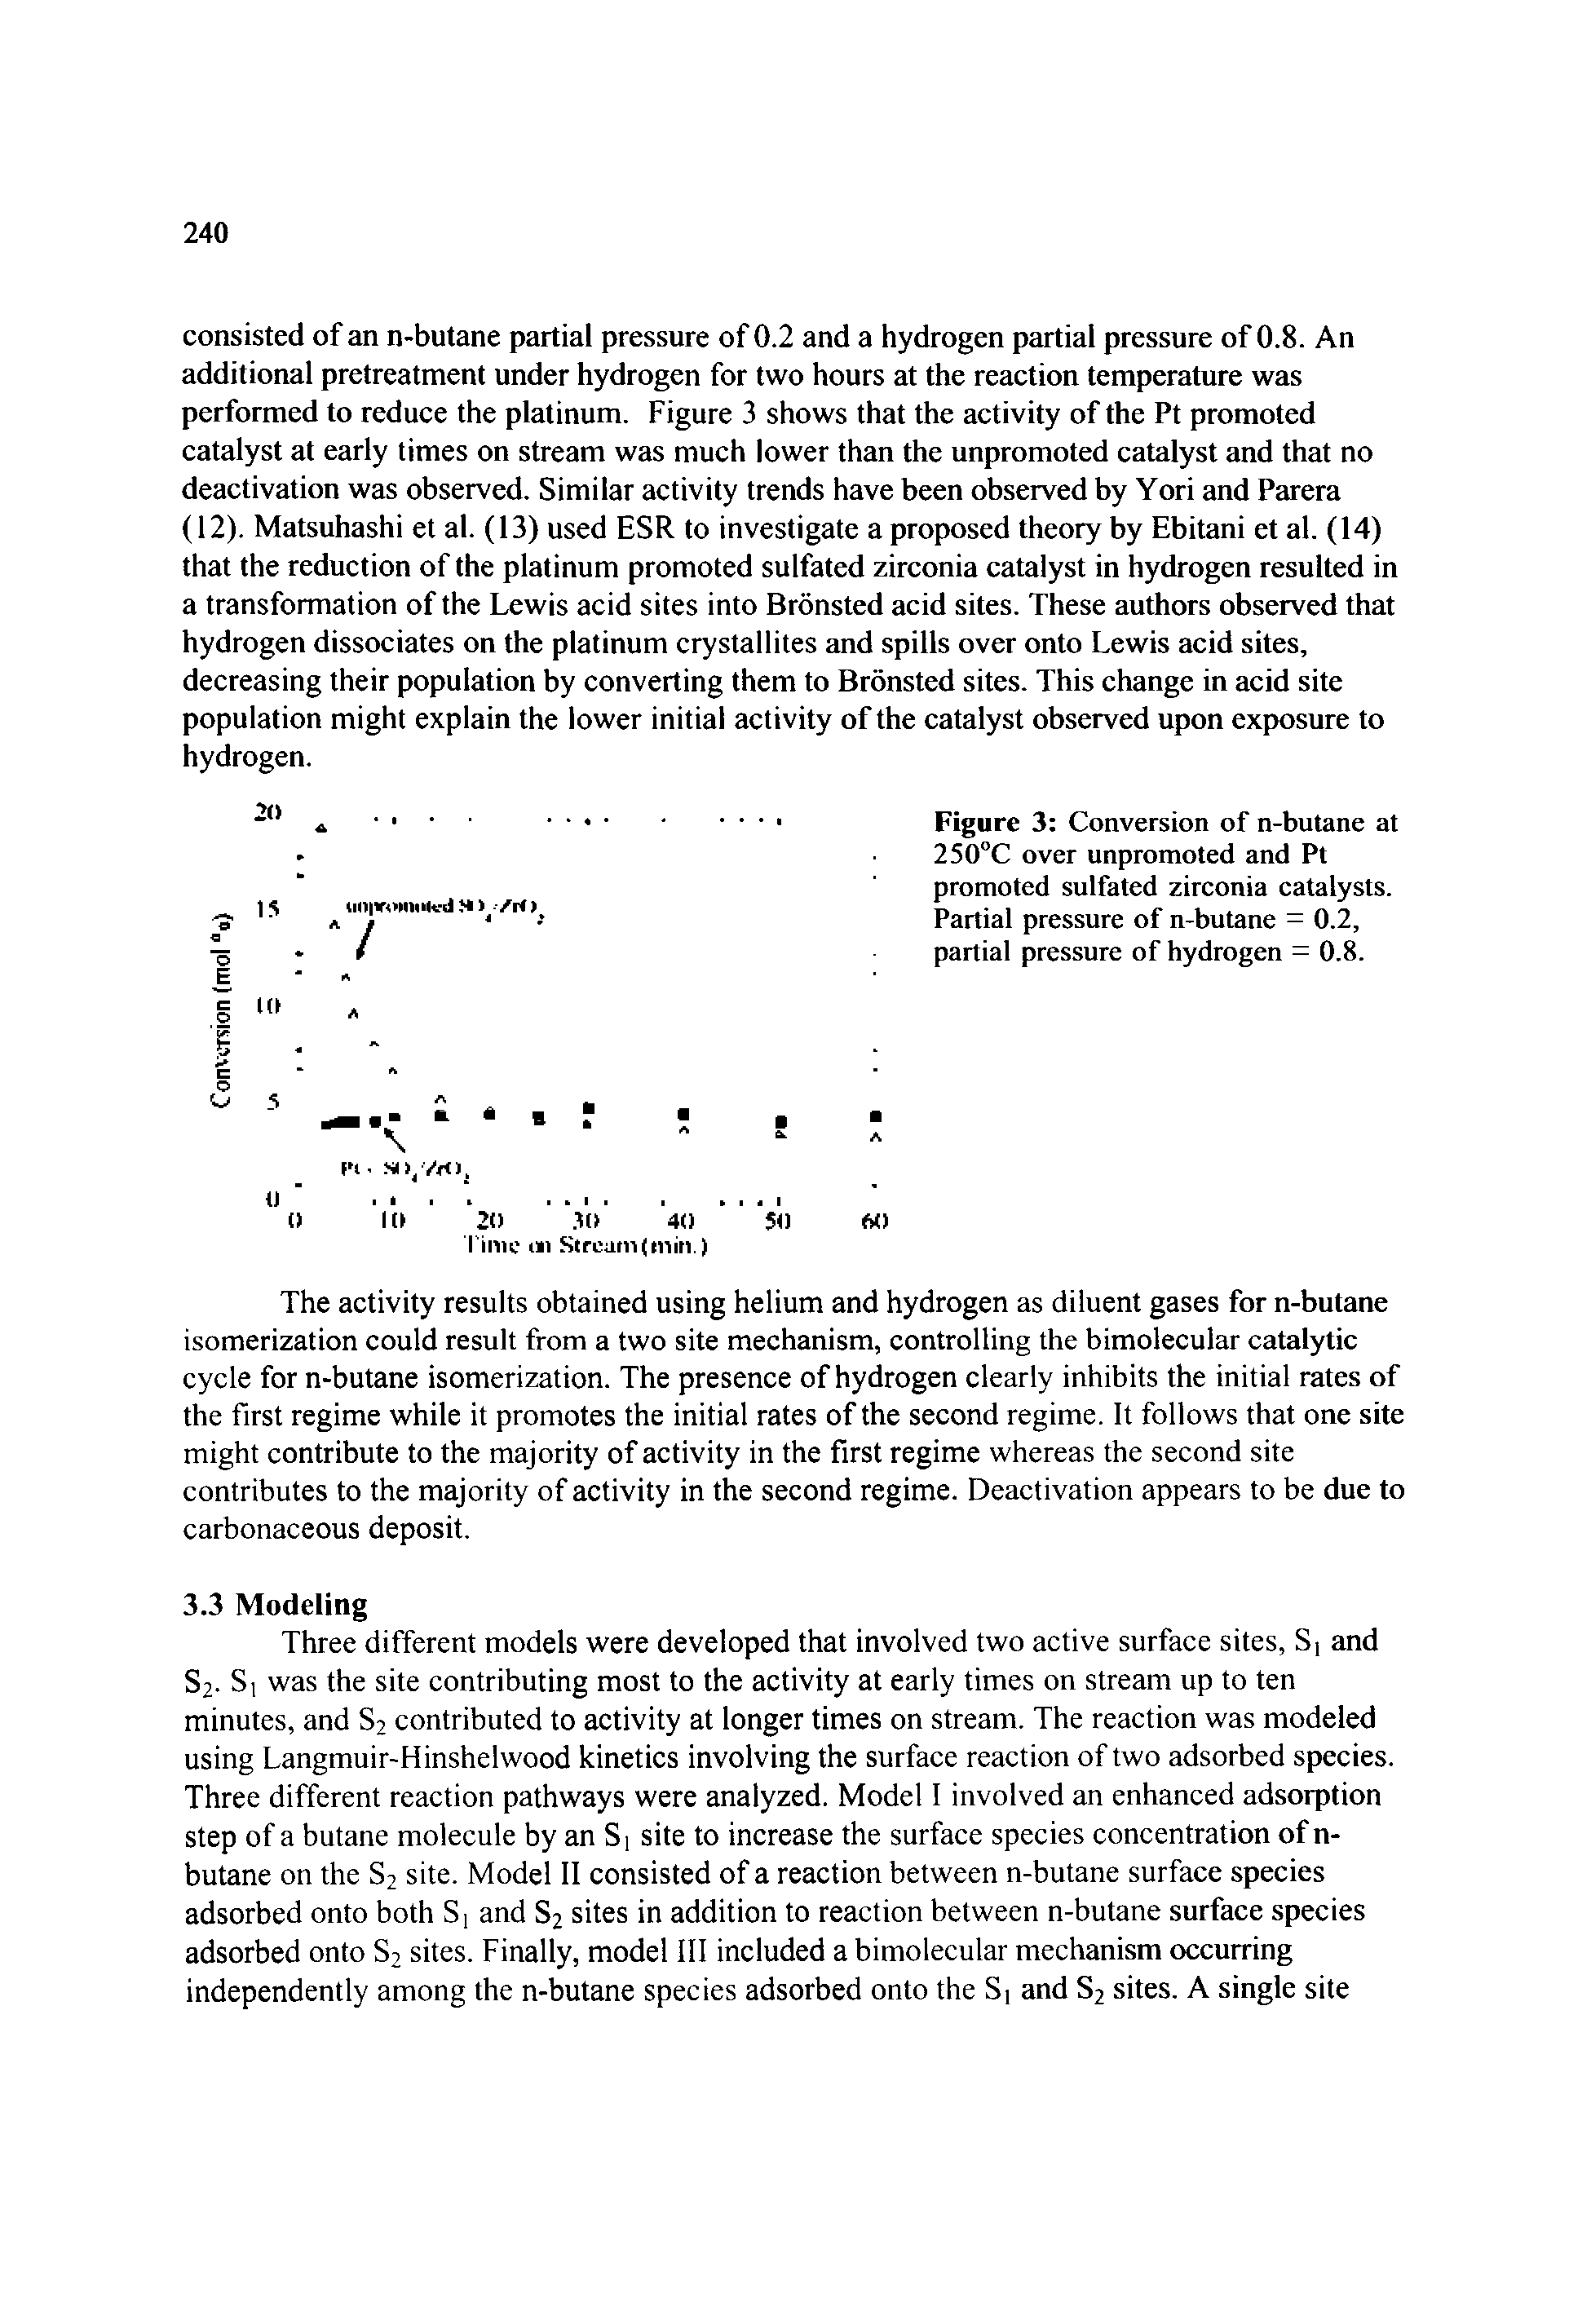 Figure 3 Conversion of n-butane at 250°C over unpromoted and Pt promoted sulfated zirconia catalysts. Partial pressure of n-butane = 0.2, partial pressure of hydrogen = 0.8.